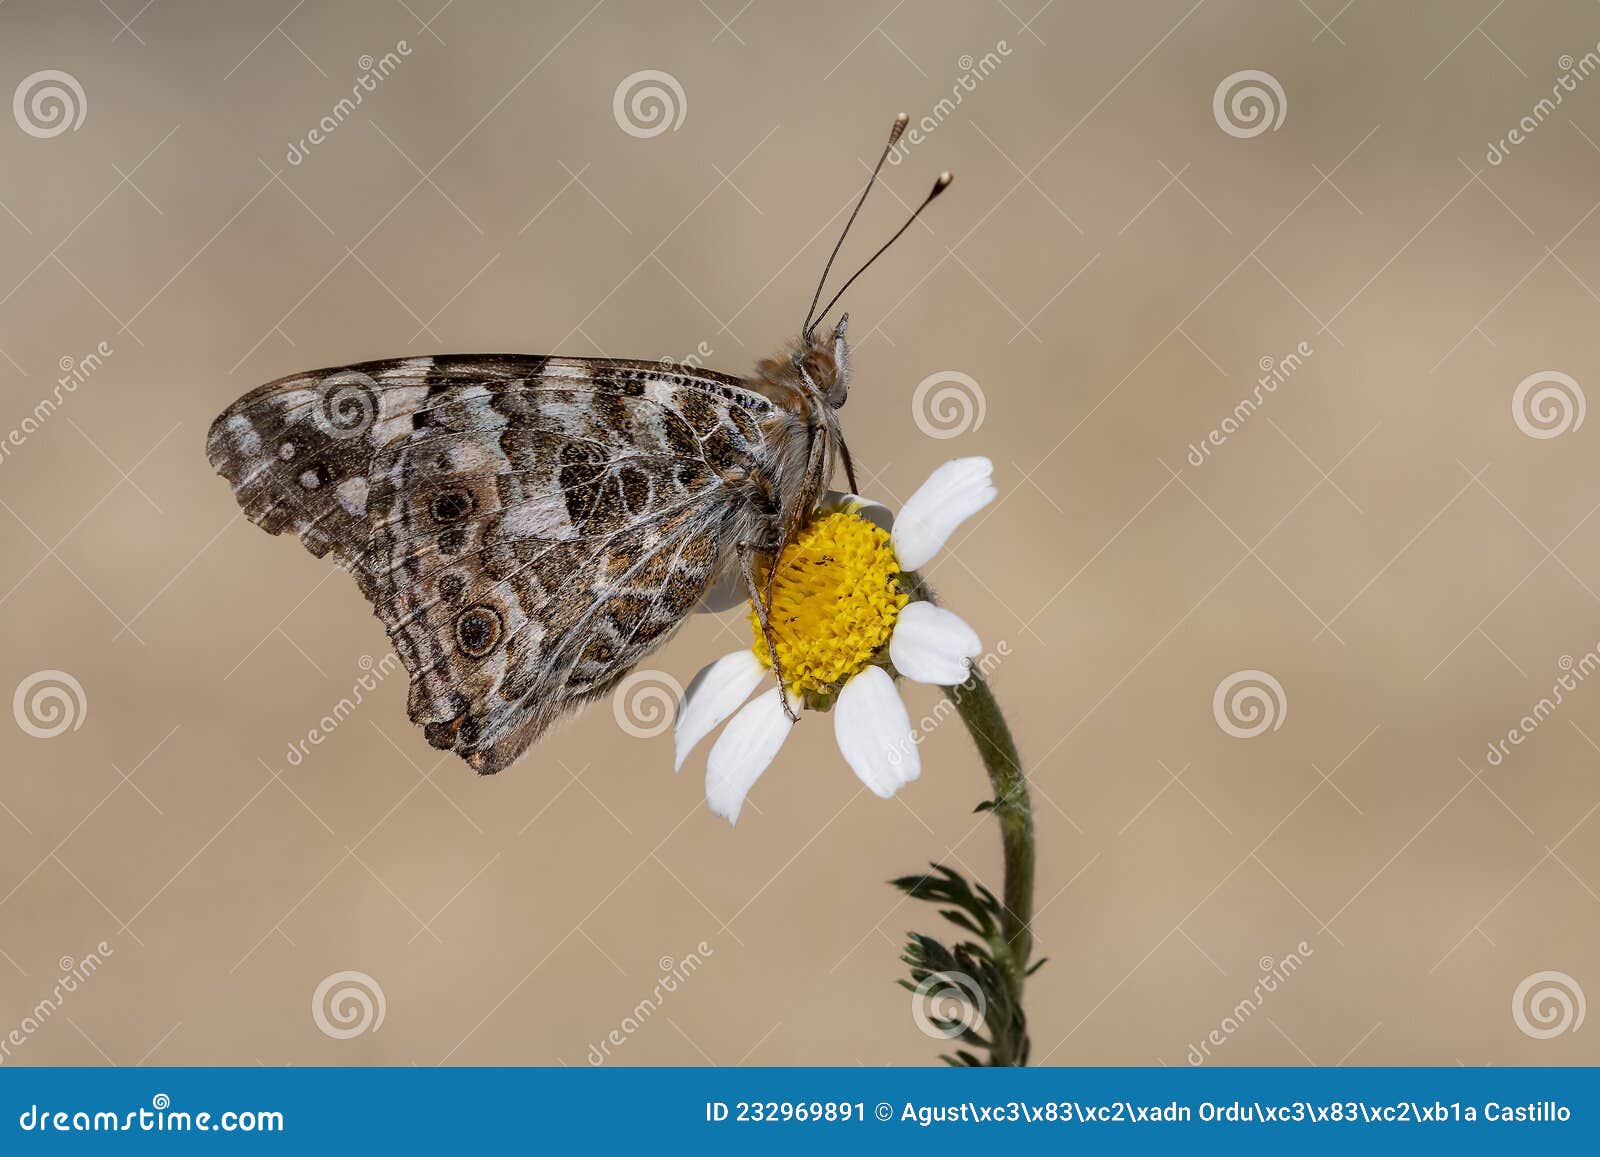 day butterfly perched on flower, vanessa cardui.